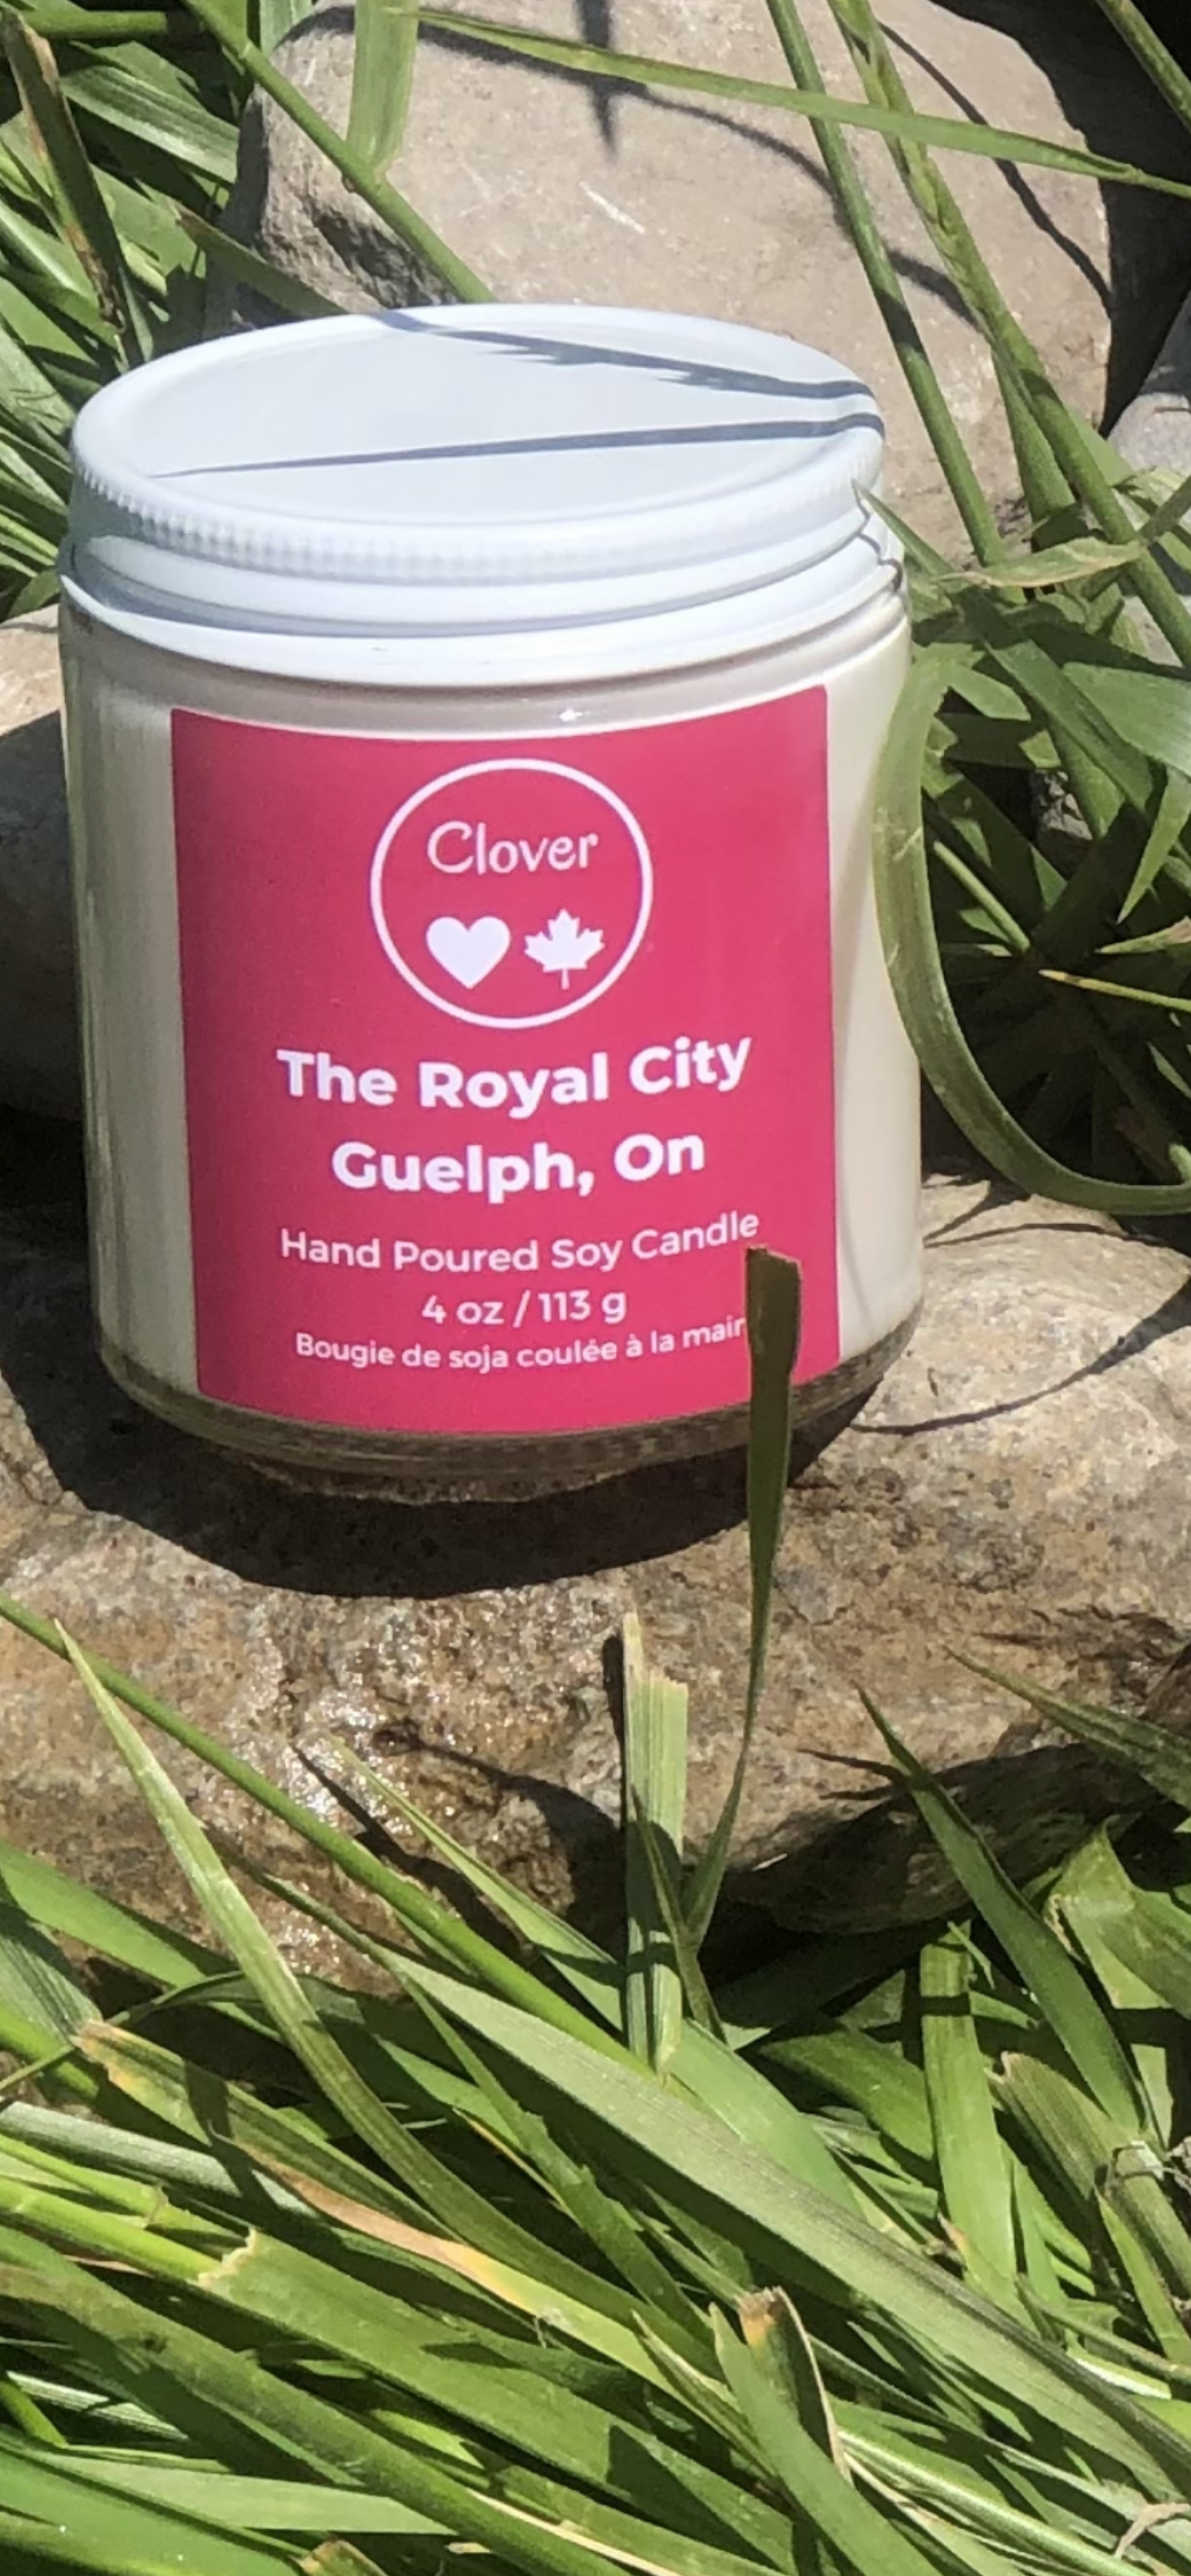 Guelph Ontario hand poured soy scented wax candle fragrance The Royal City 4 oz